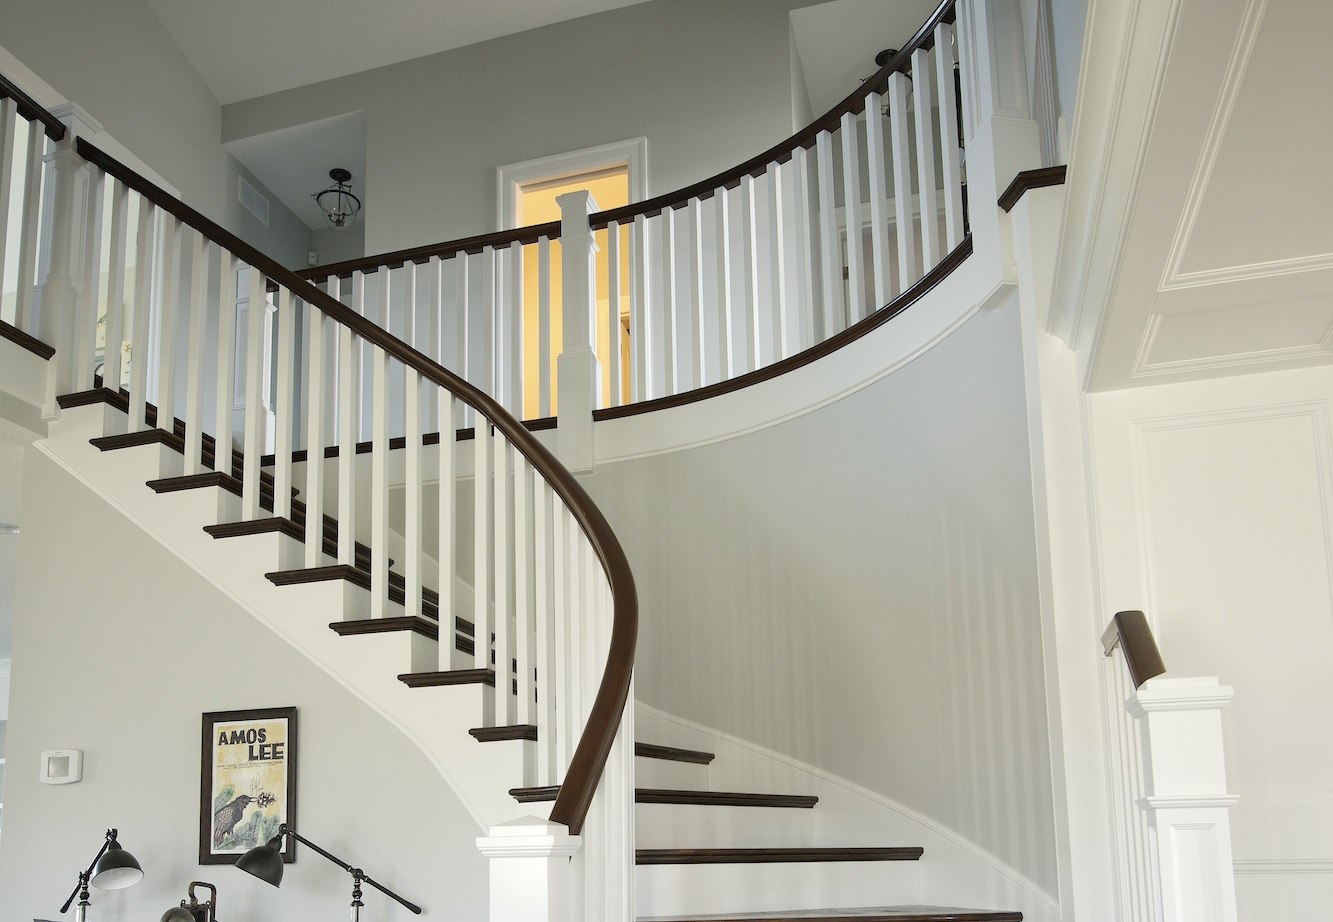 This sweeping staircase is one of several dramatic design elements featured in the award-winning The Nantucket, a showcase model displayed in the 2013 NW Natural Parade of Homes, held in July.